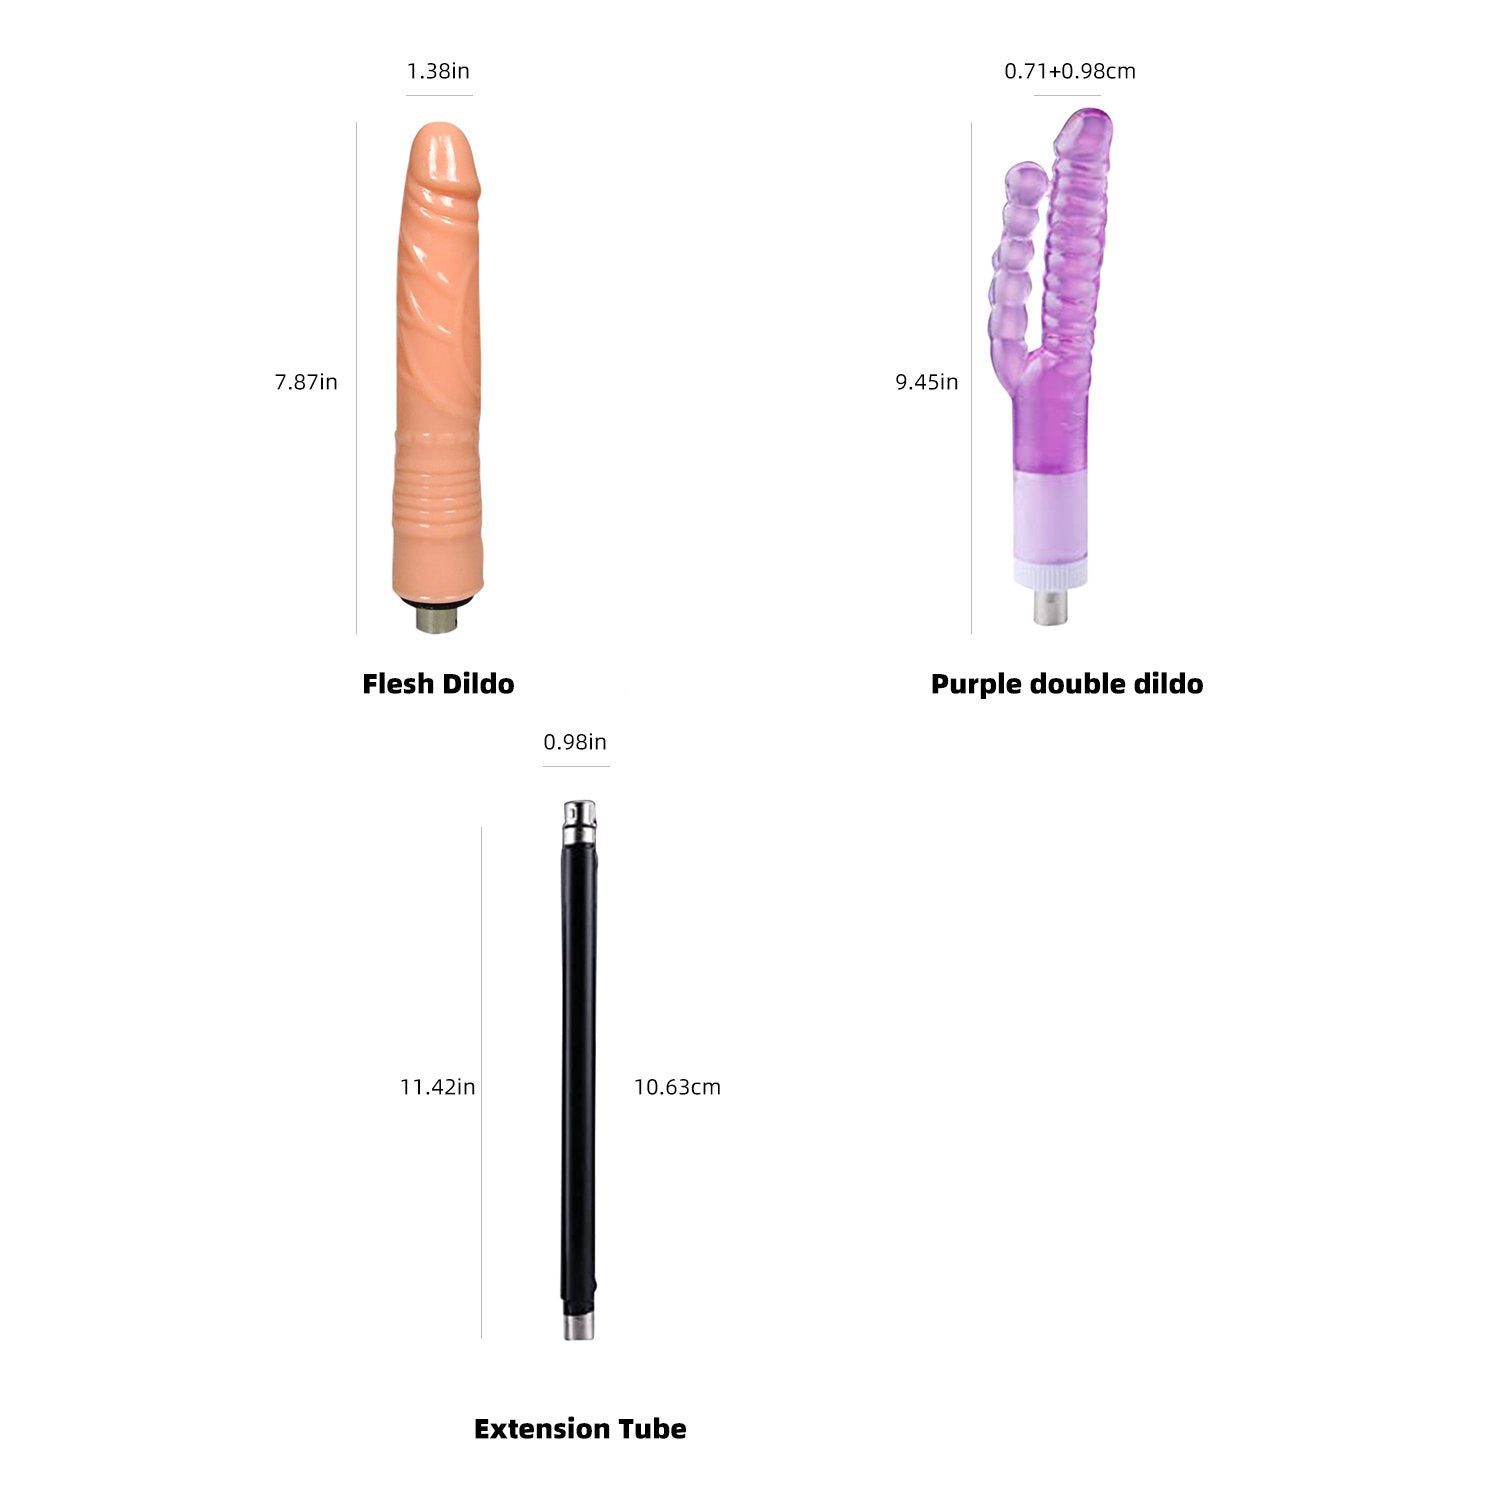 Female Automatic Sex Machines for Sale With Dildo